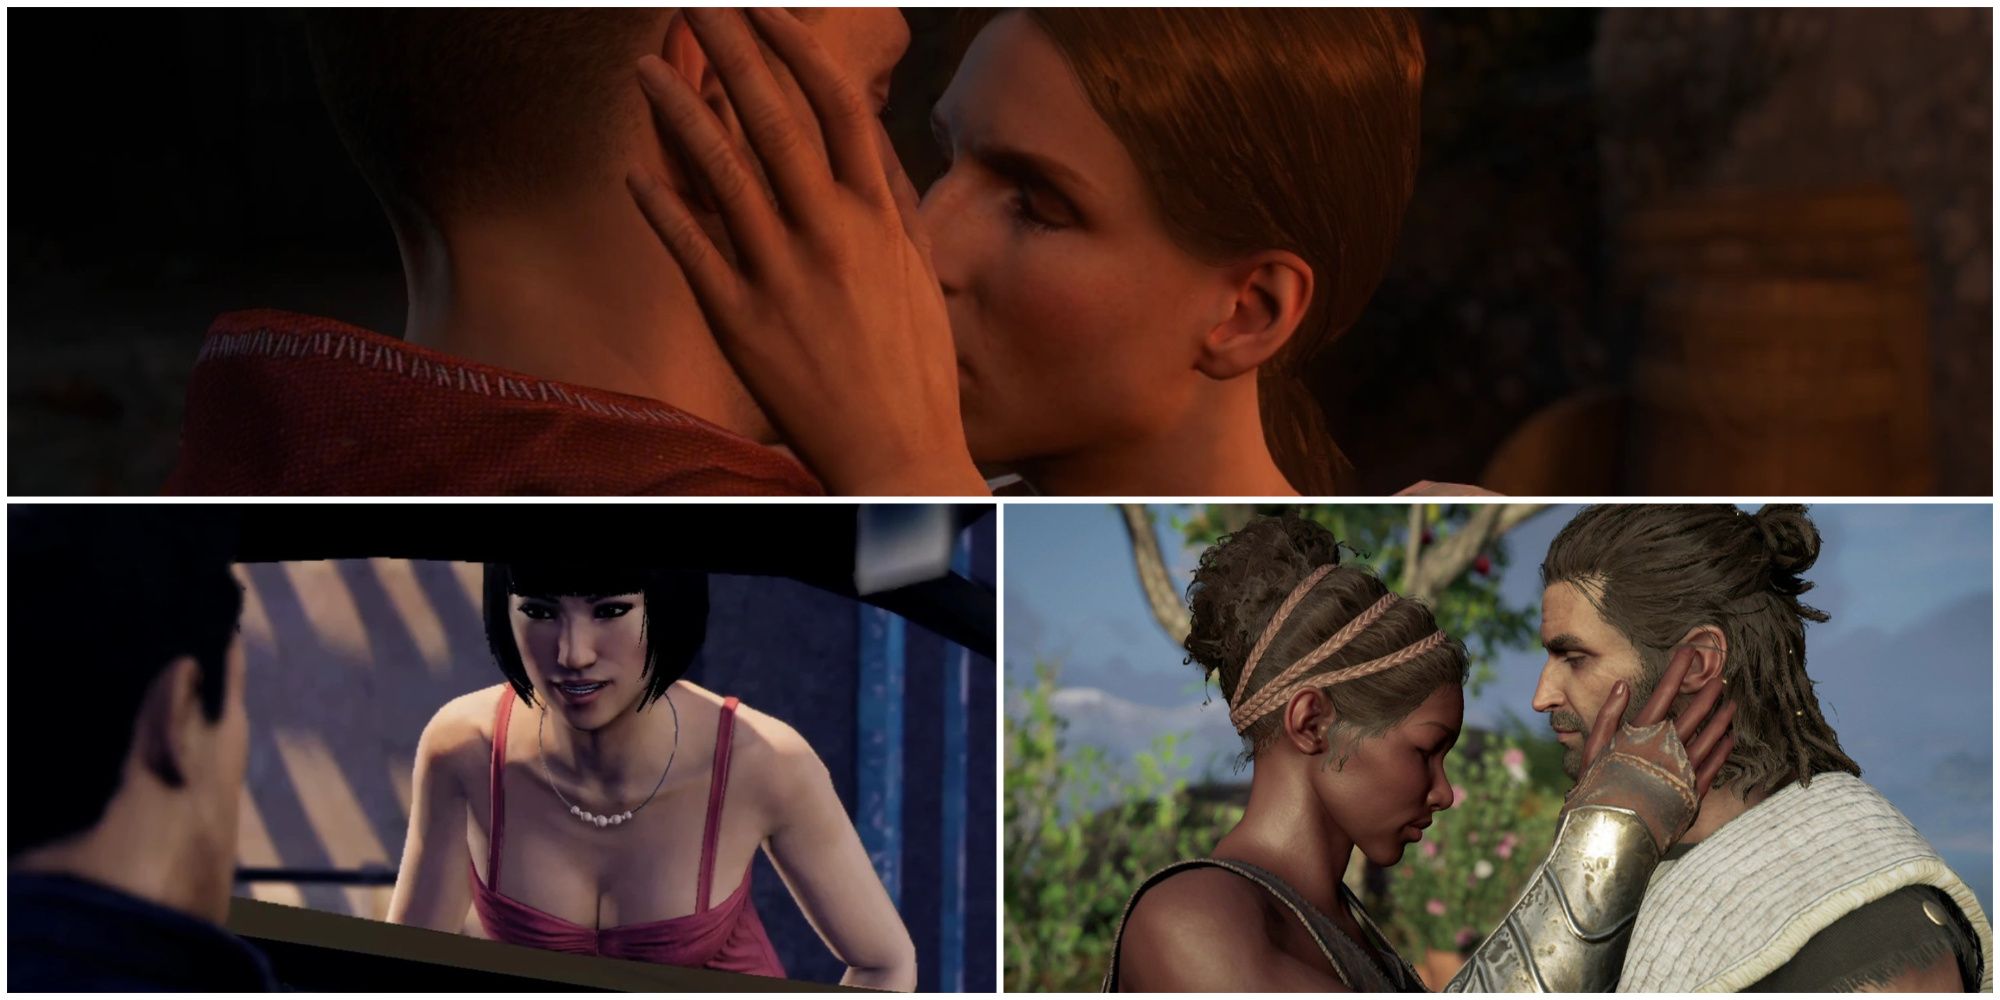 Open-World Games Romance- Kingdom Come: Deliverance, Sleeping Dogs, Assassin's Creed Odyssey